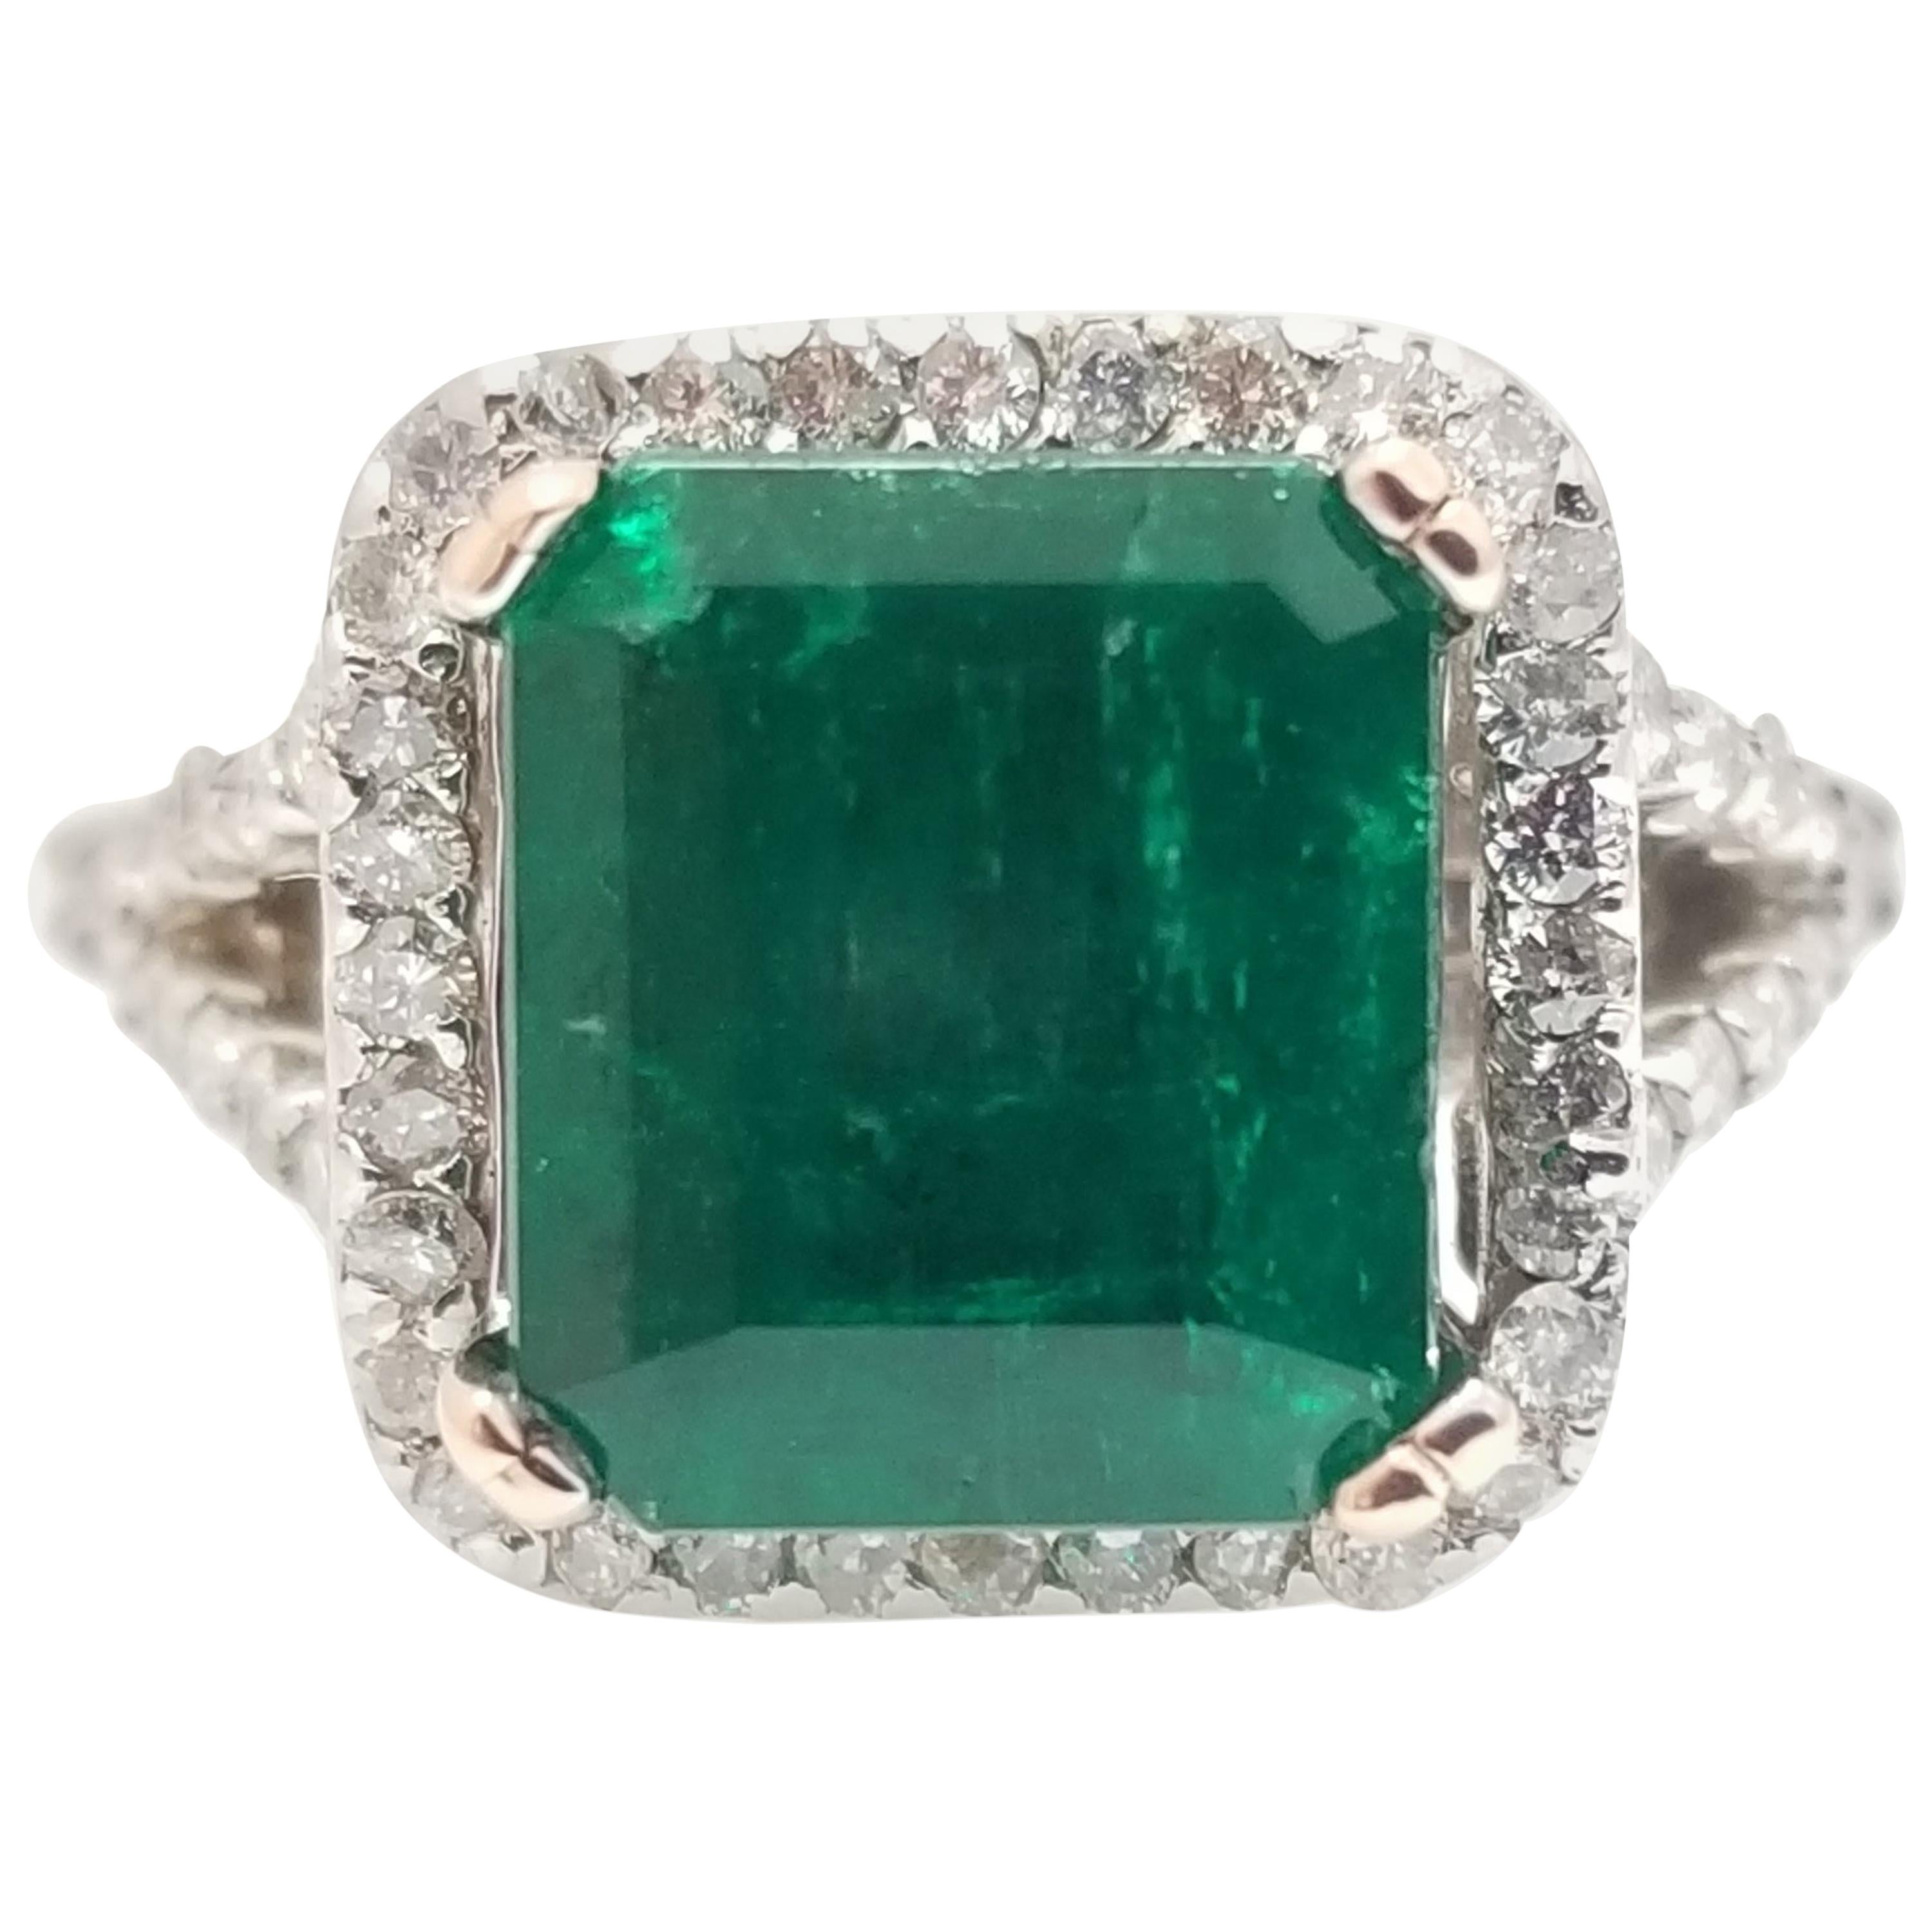 2.28 Carat Colombian Emerald and Diamond Ring